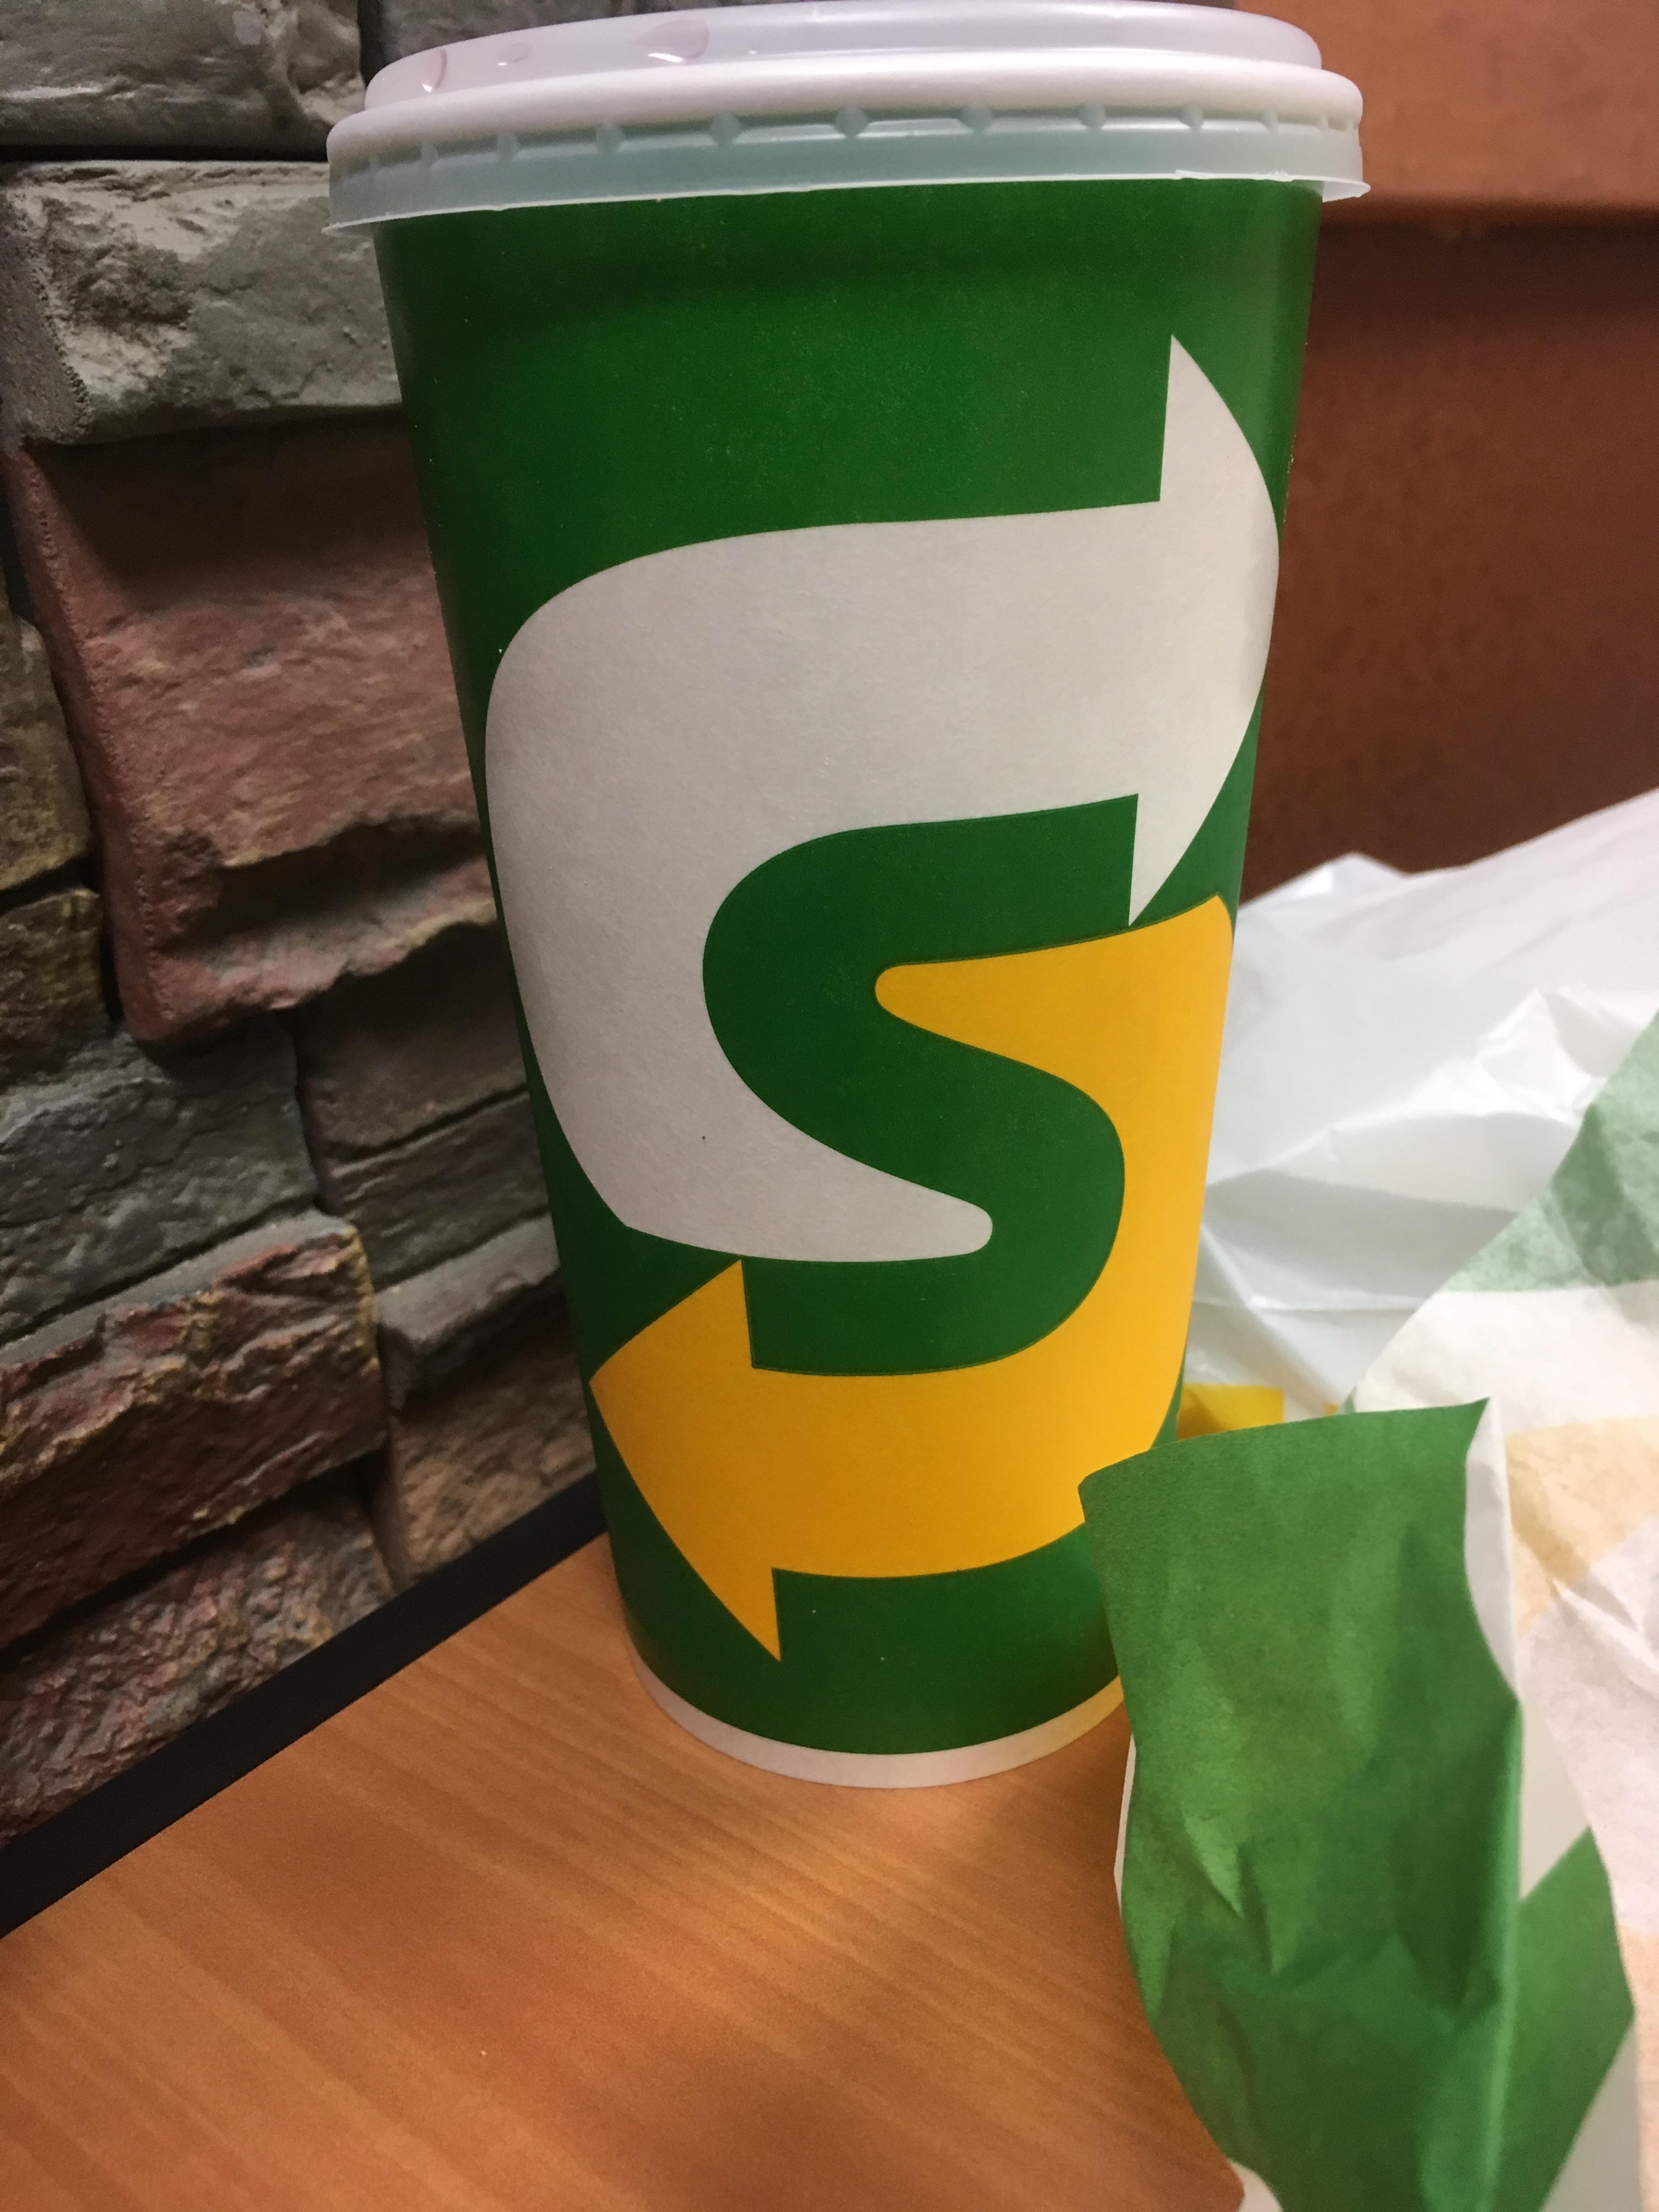 New Subway Logo - The subway logo redesign is killing it : graphic_design